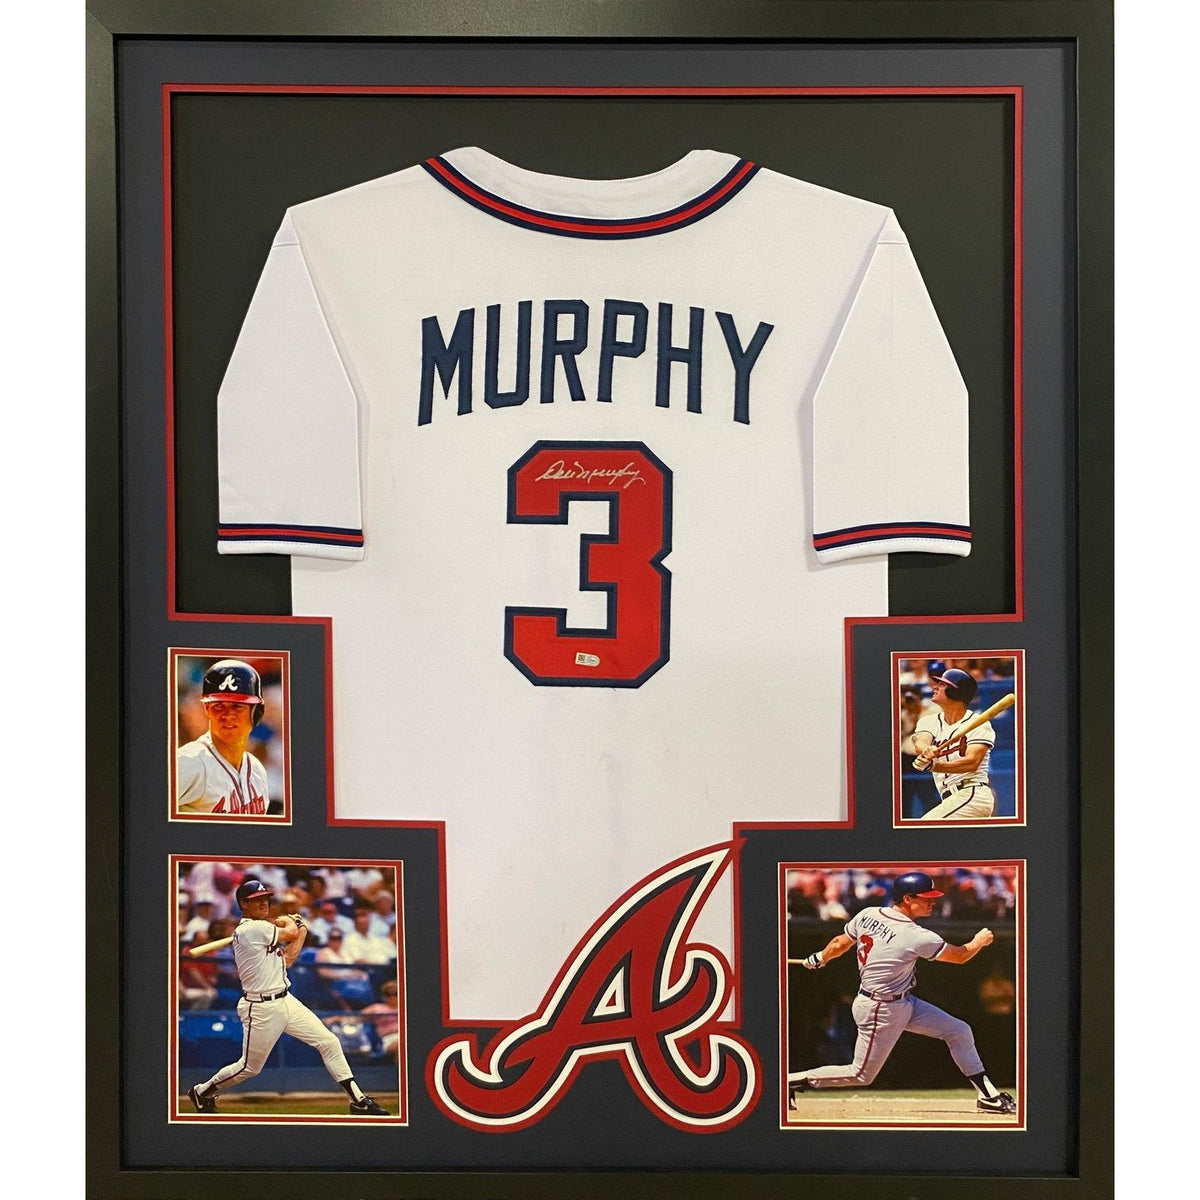 Dale Murphy Autographed and Framed Blue Braves Jersey